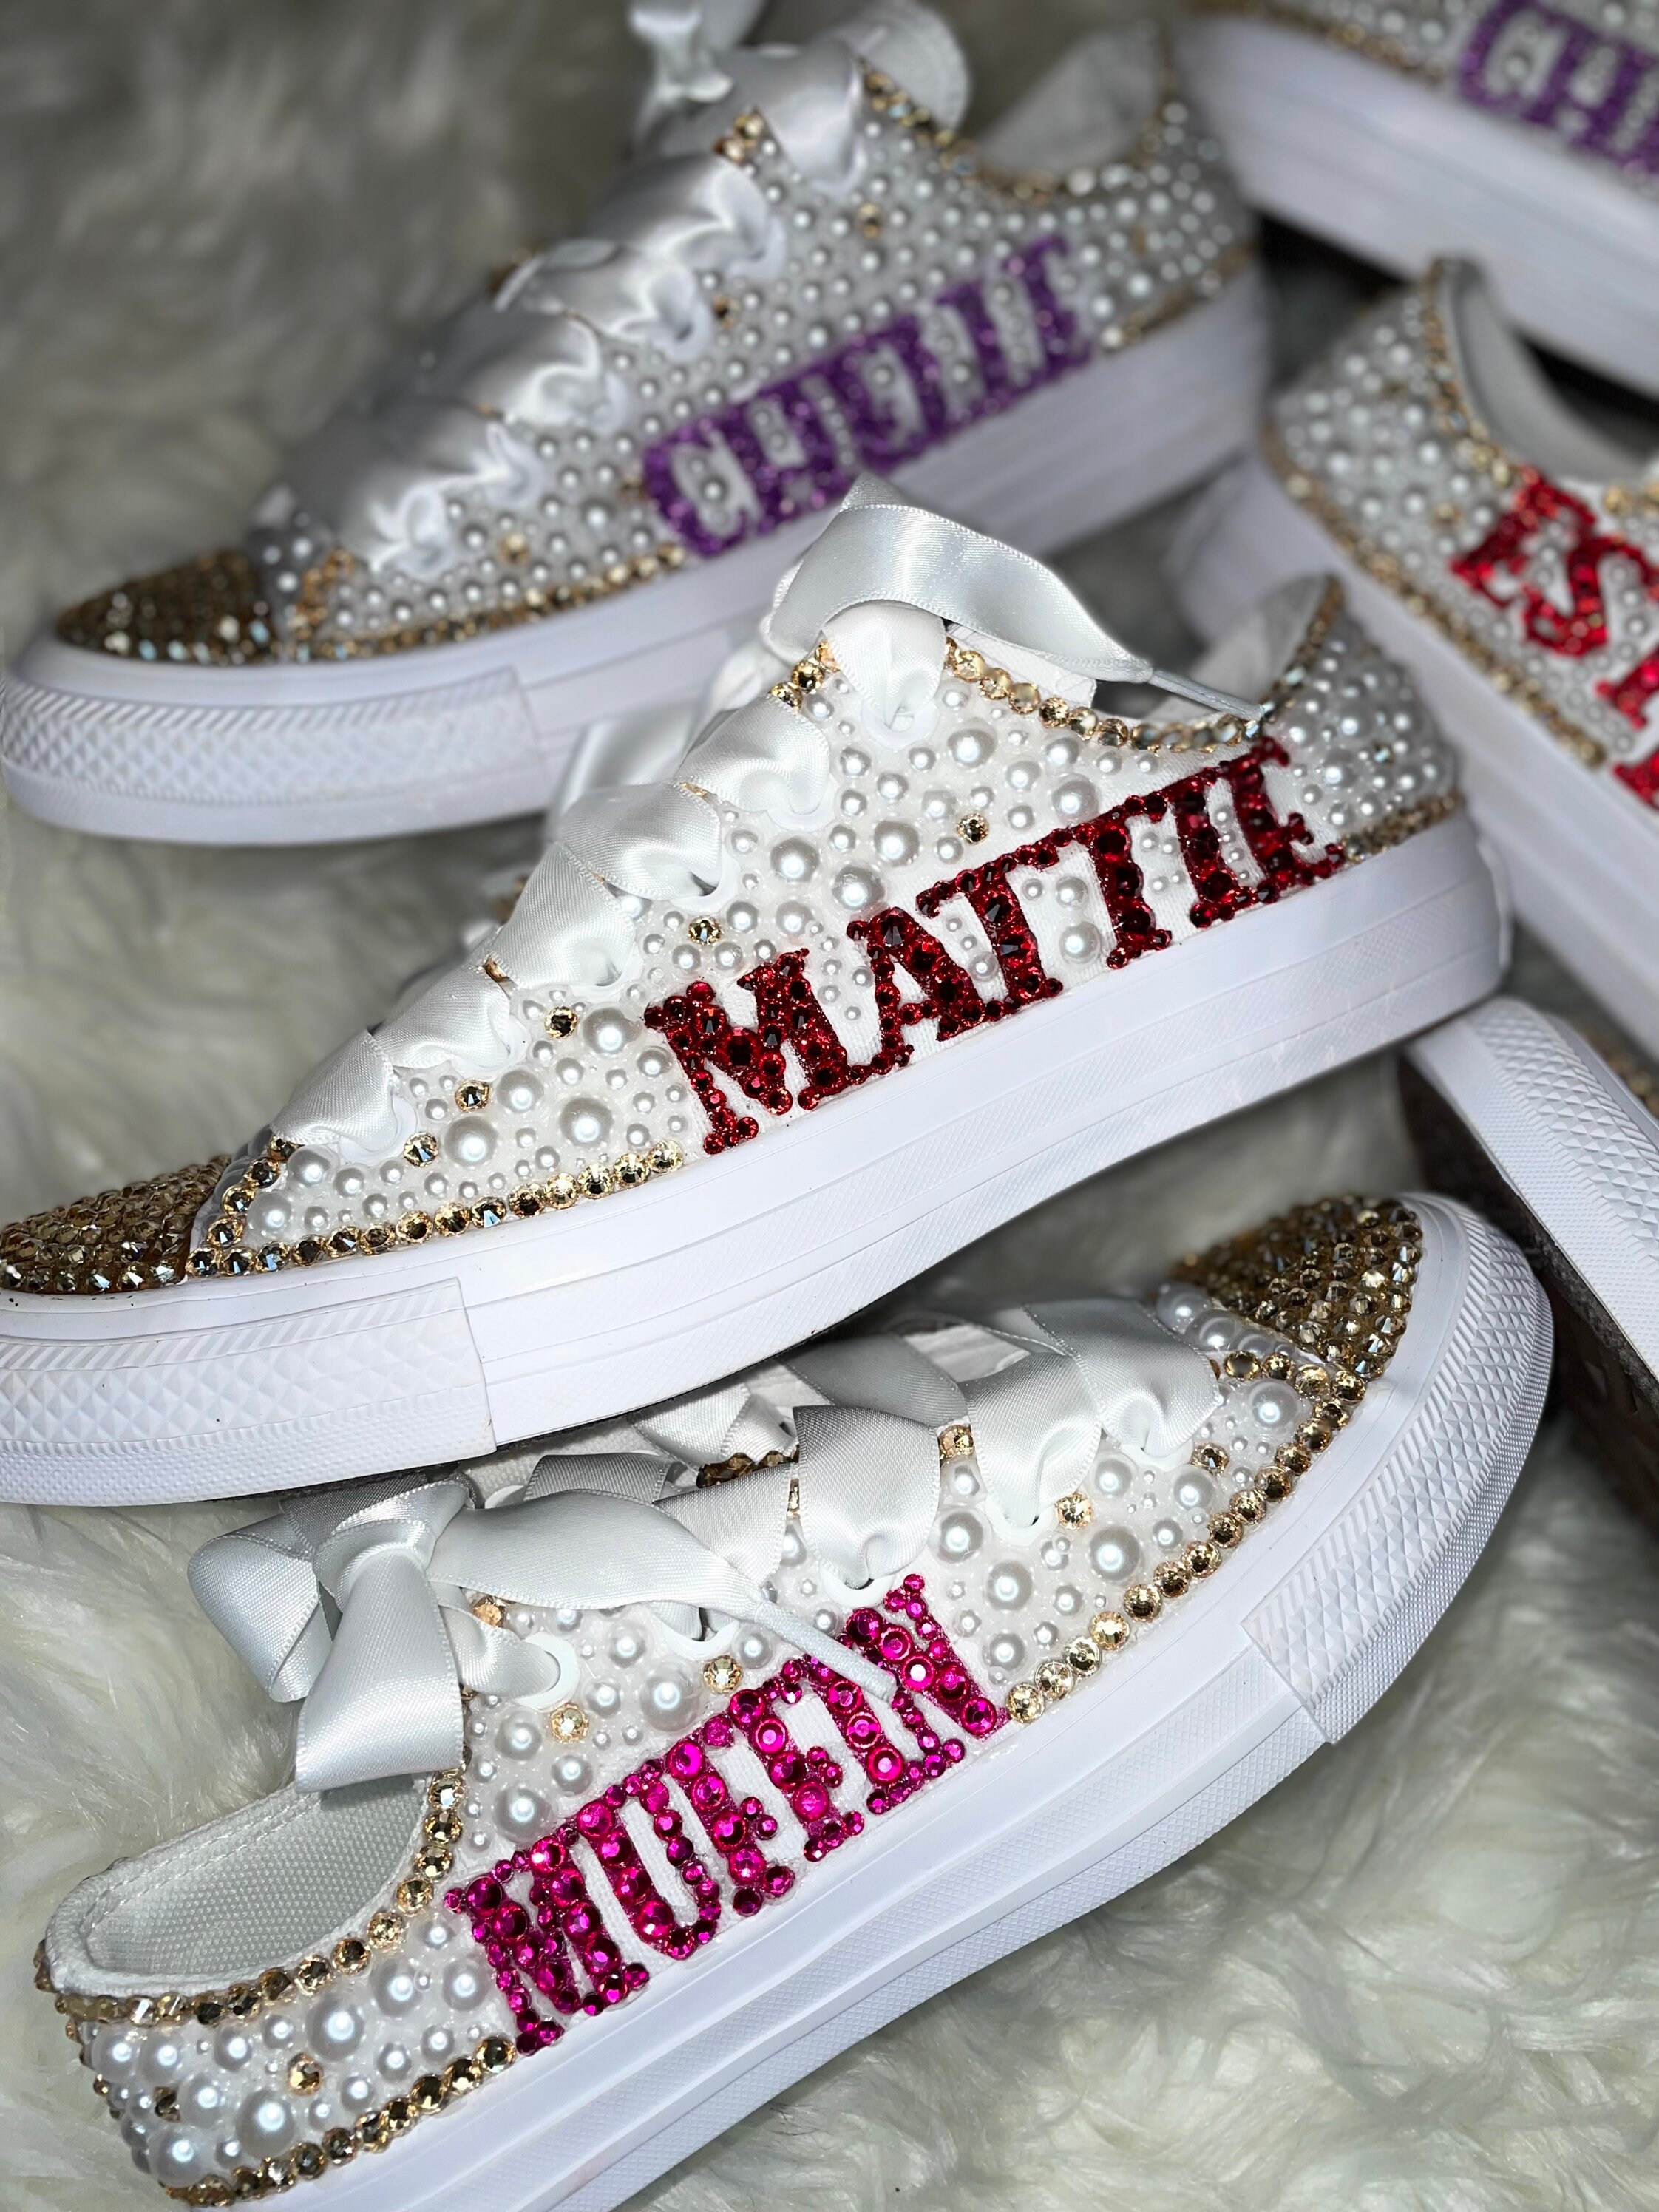 Mommy & Me Converse - Etsy